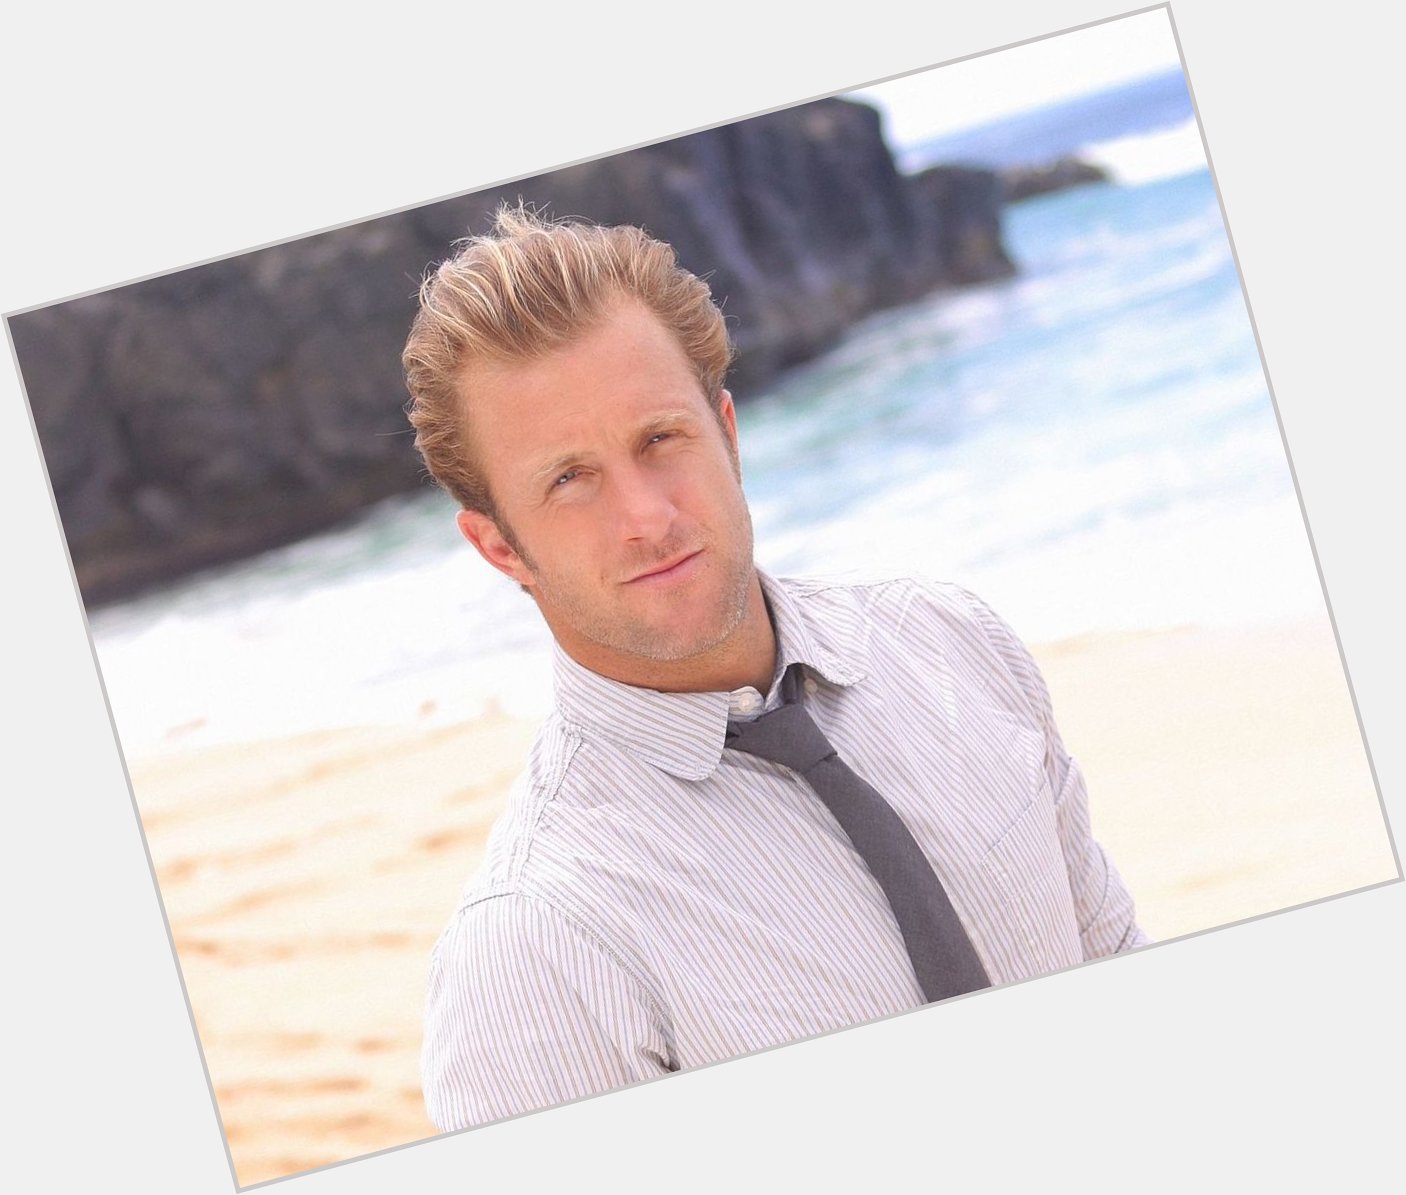 23 Aug 2020
Happy birthday to actor Scott Caan 44 years old. 